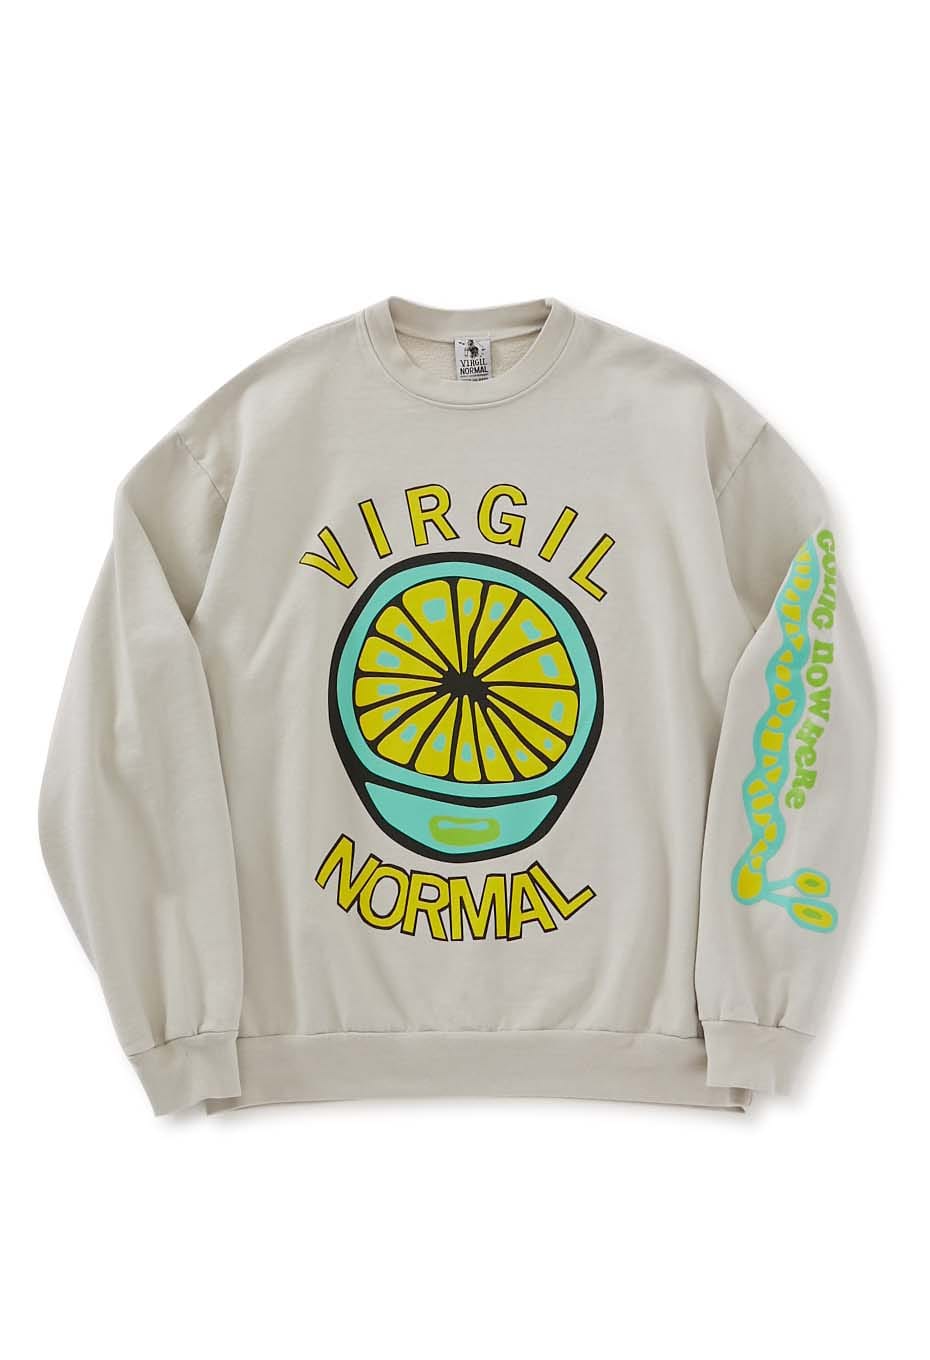 VIRGIL NORMAL LETS GET NICE Crew sweat fabric